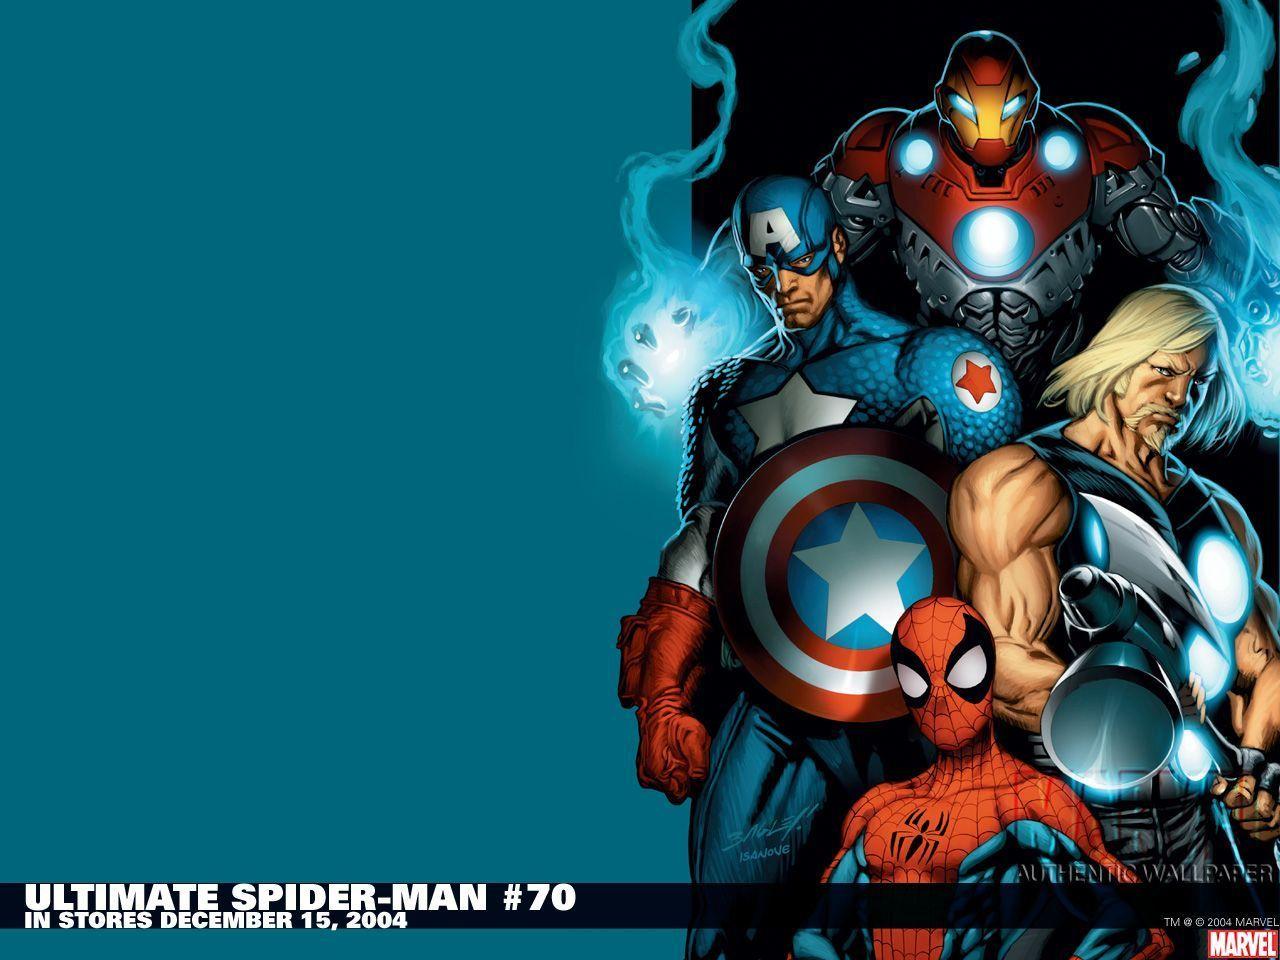 Marvel Wallpapers 35 259996 Image HD Wallpapers